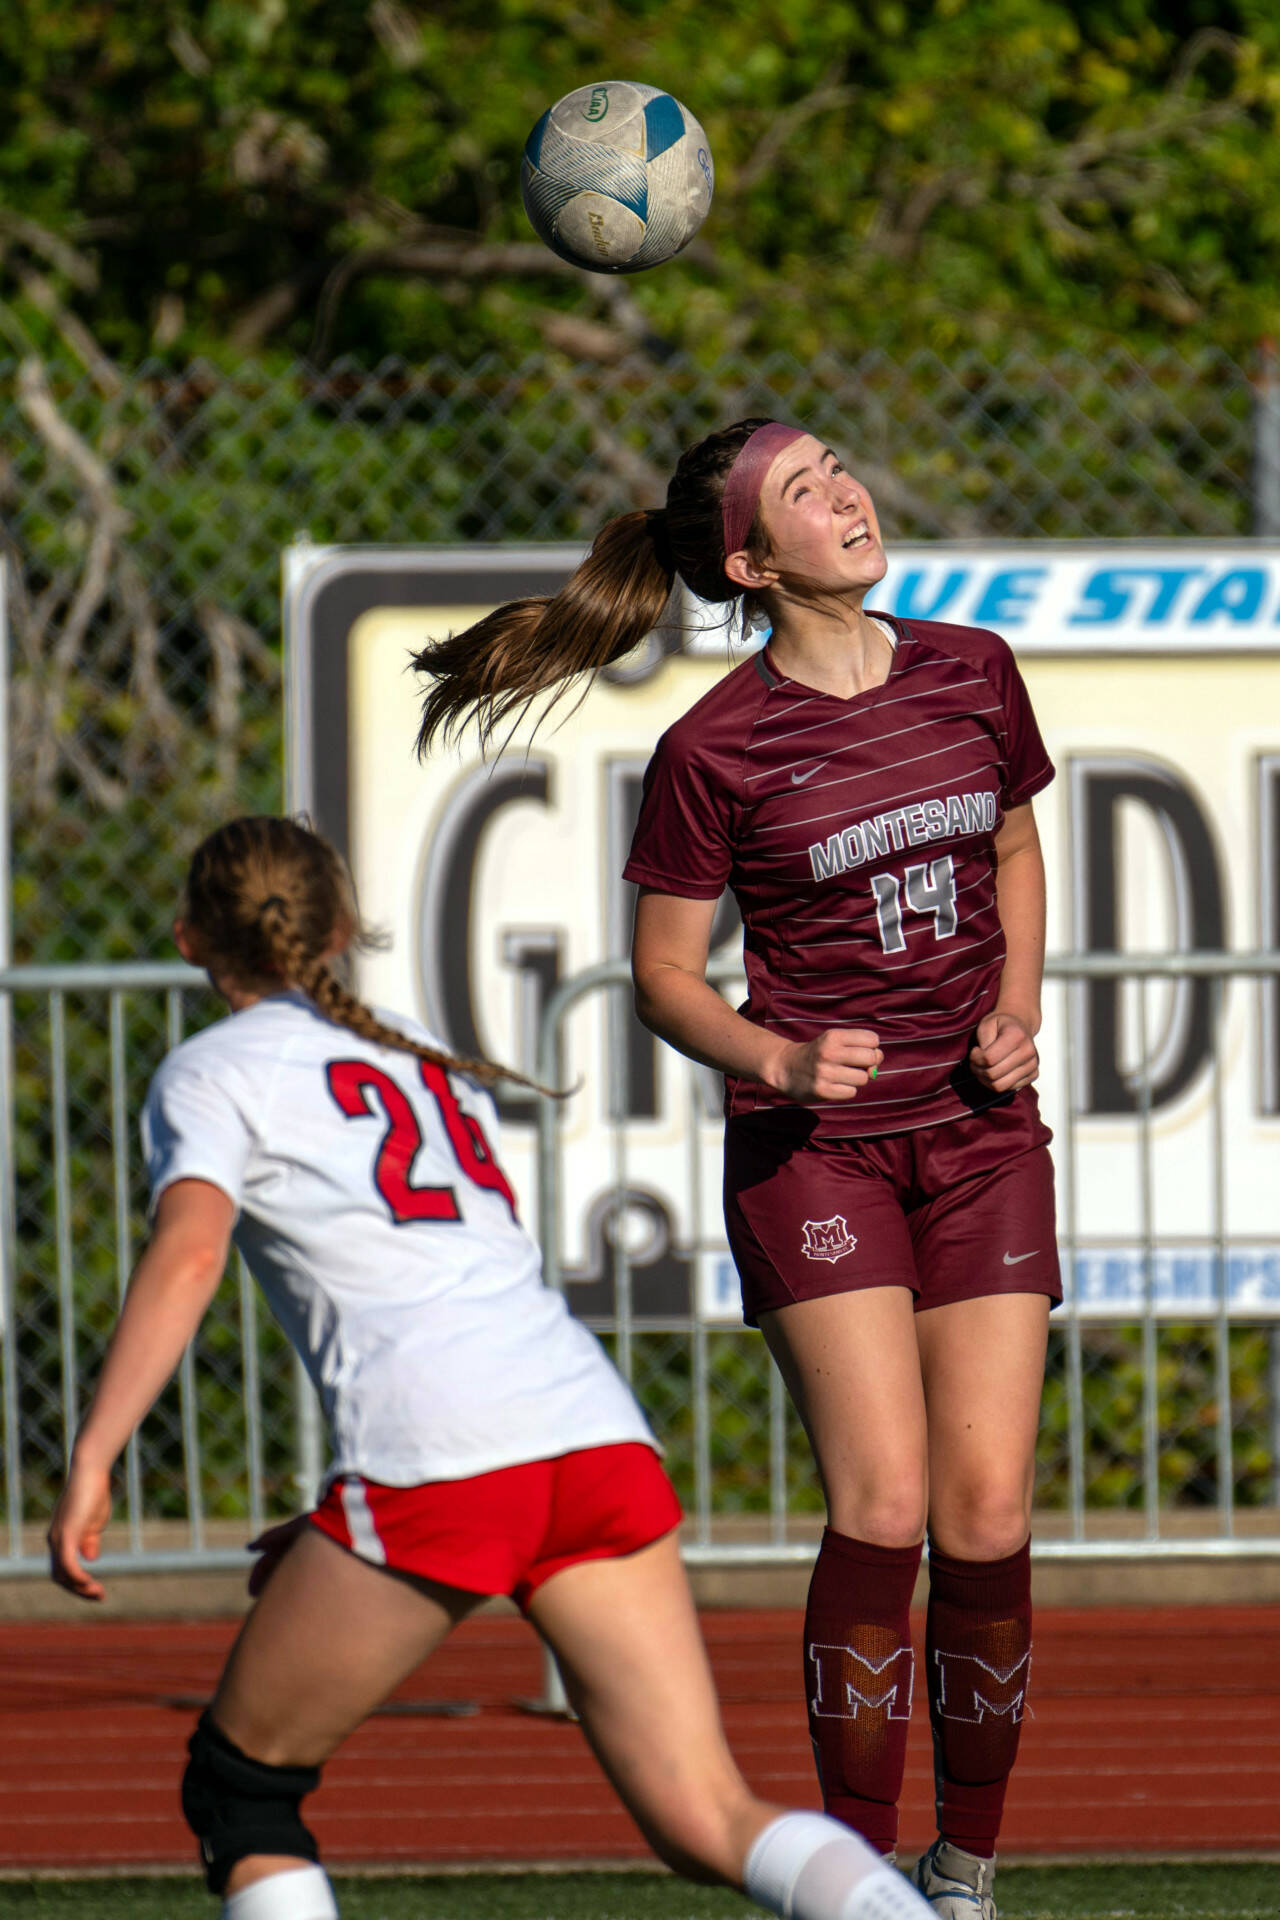 PHOTO BY FOREST WORGUM Montesano midfielder Ava Schrader (14) heads the ball during a 2-1 victory (4-2 on penalty kicks) over Seattle Academy on Saturday in Montesano.